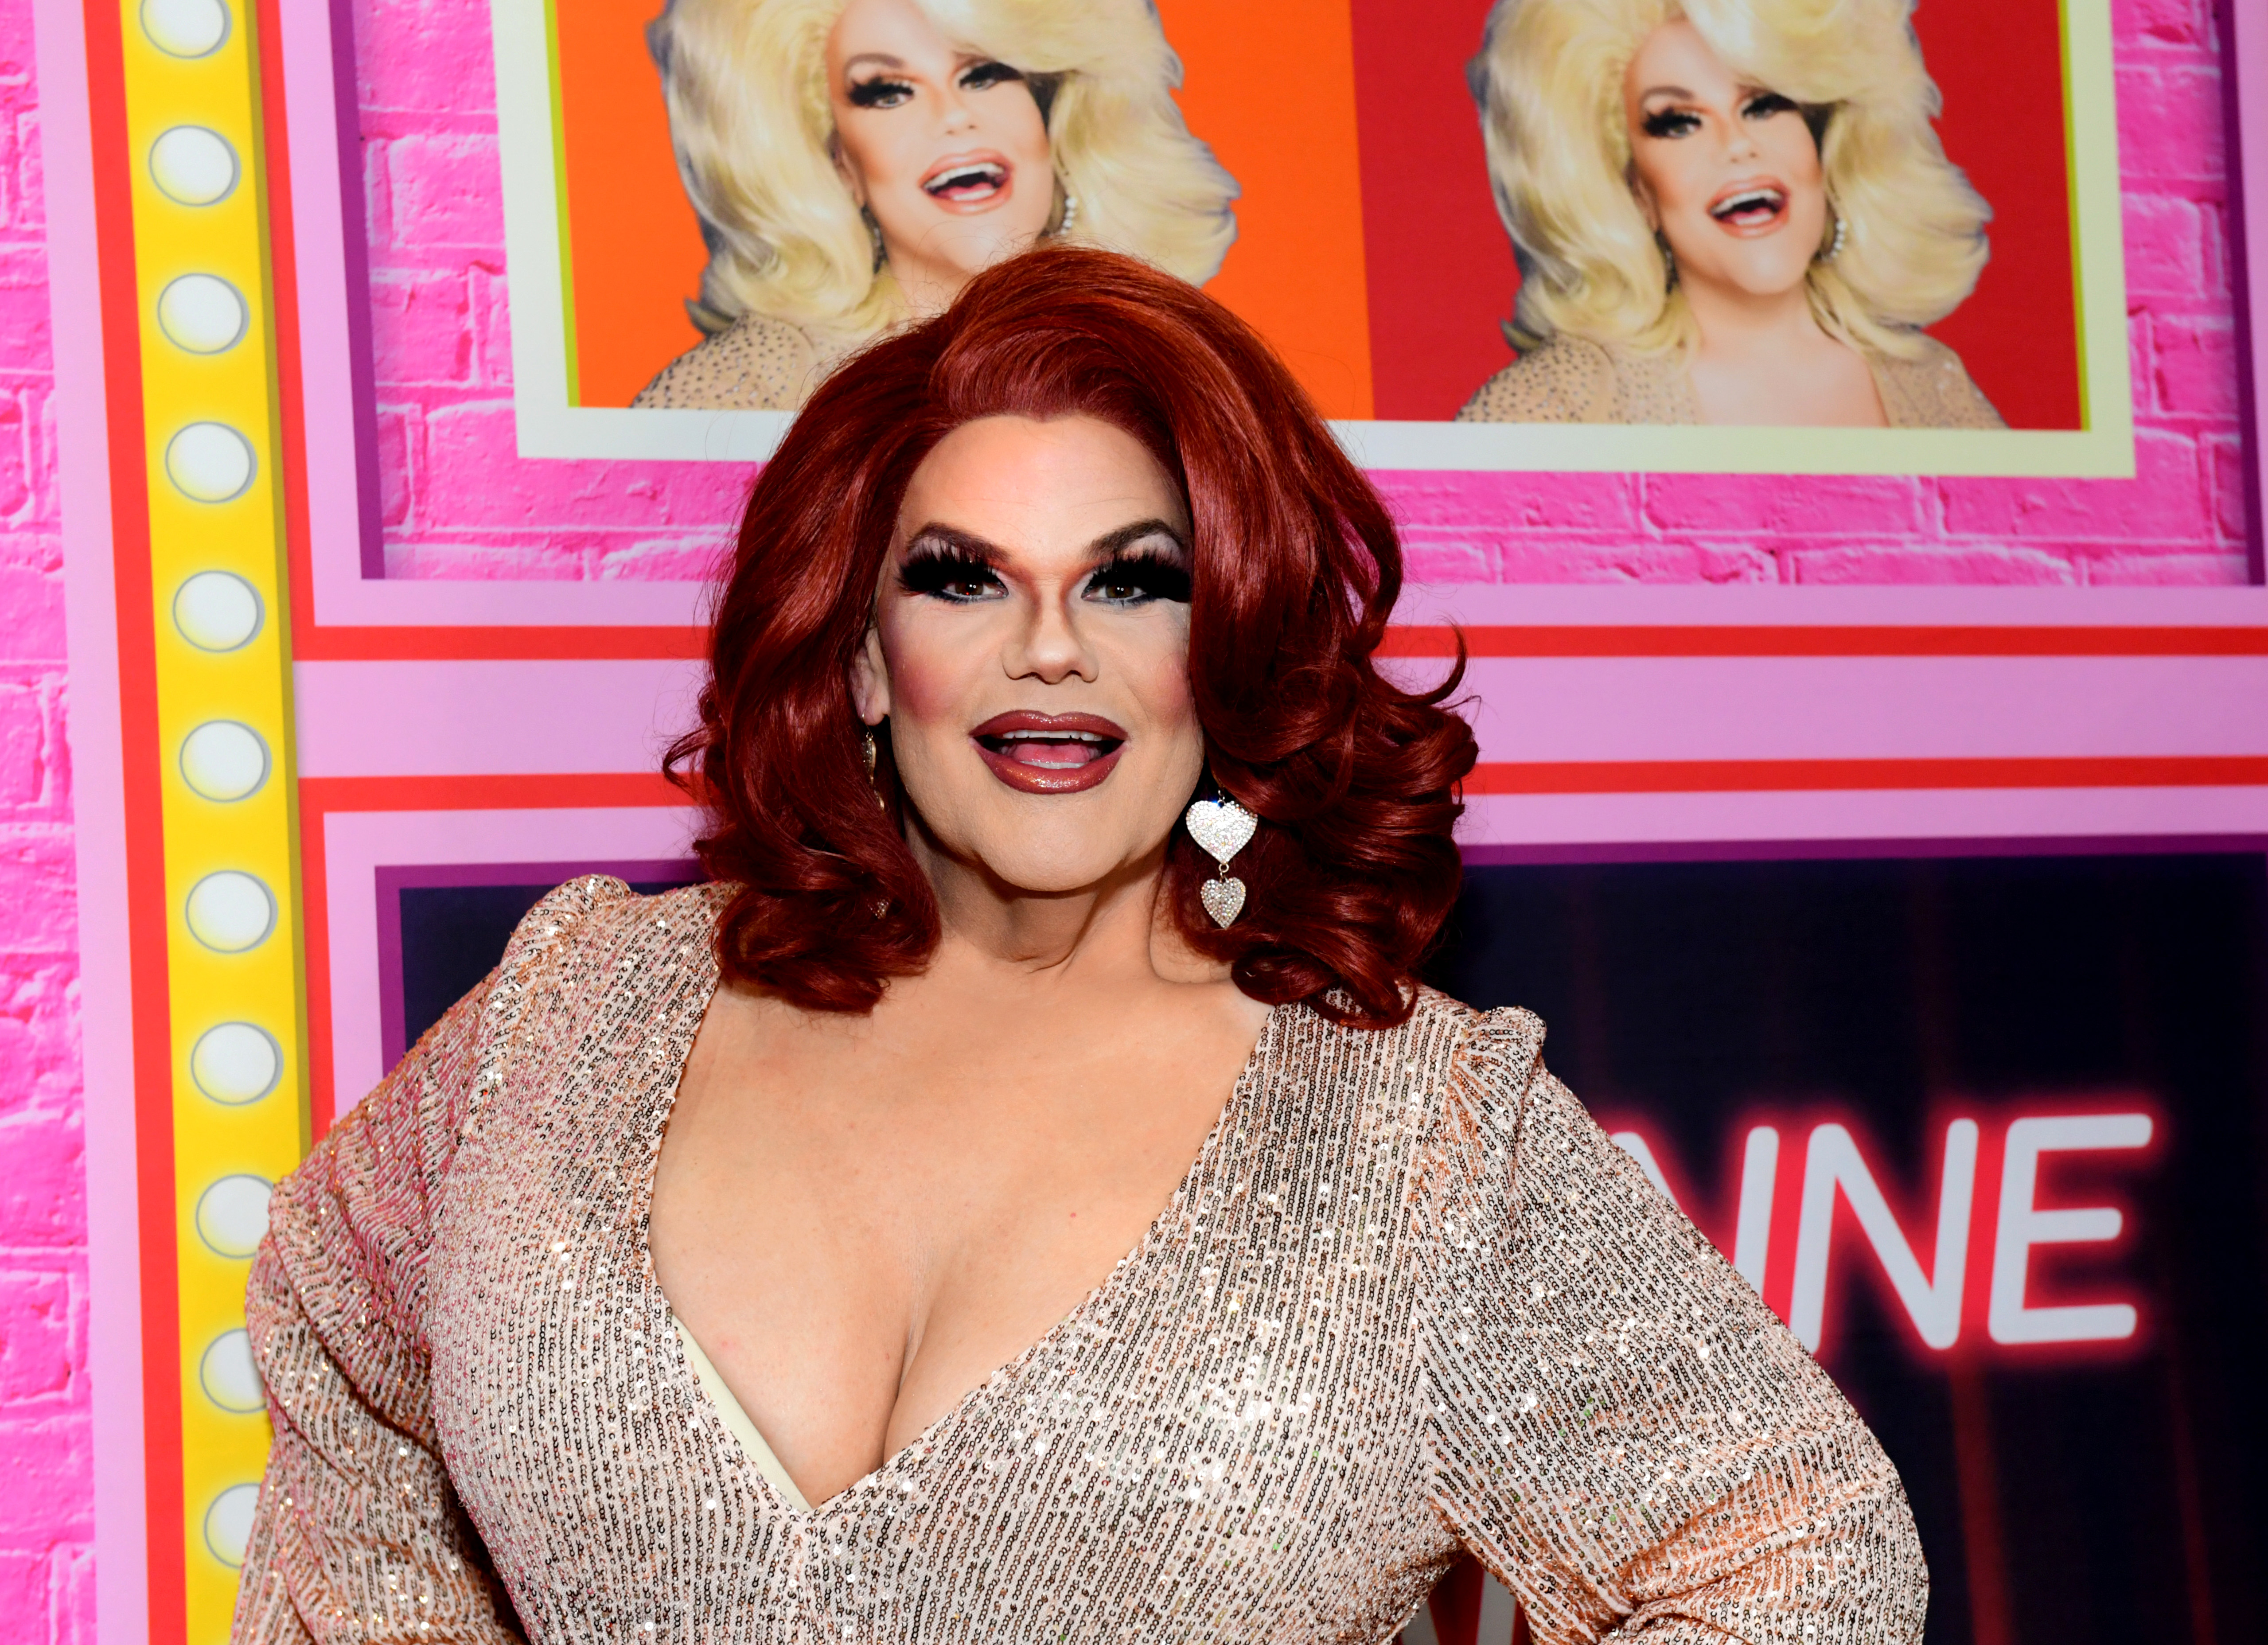 Upstate NY drag queen Darienne Lake releases new standup comedy